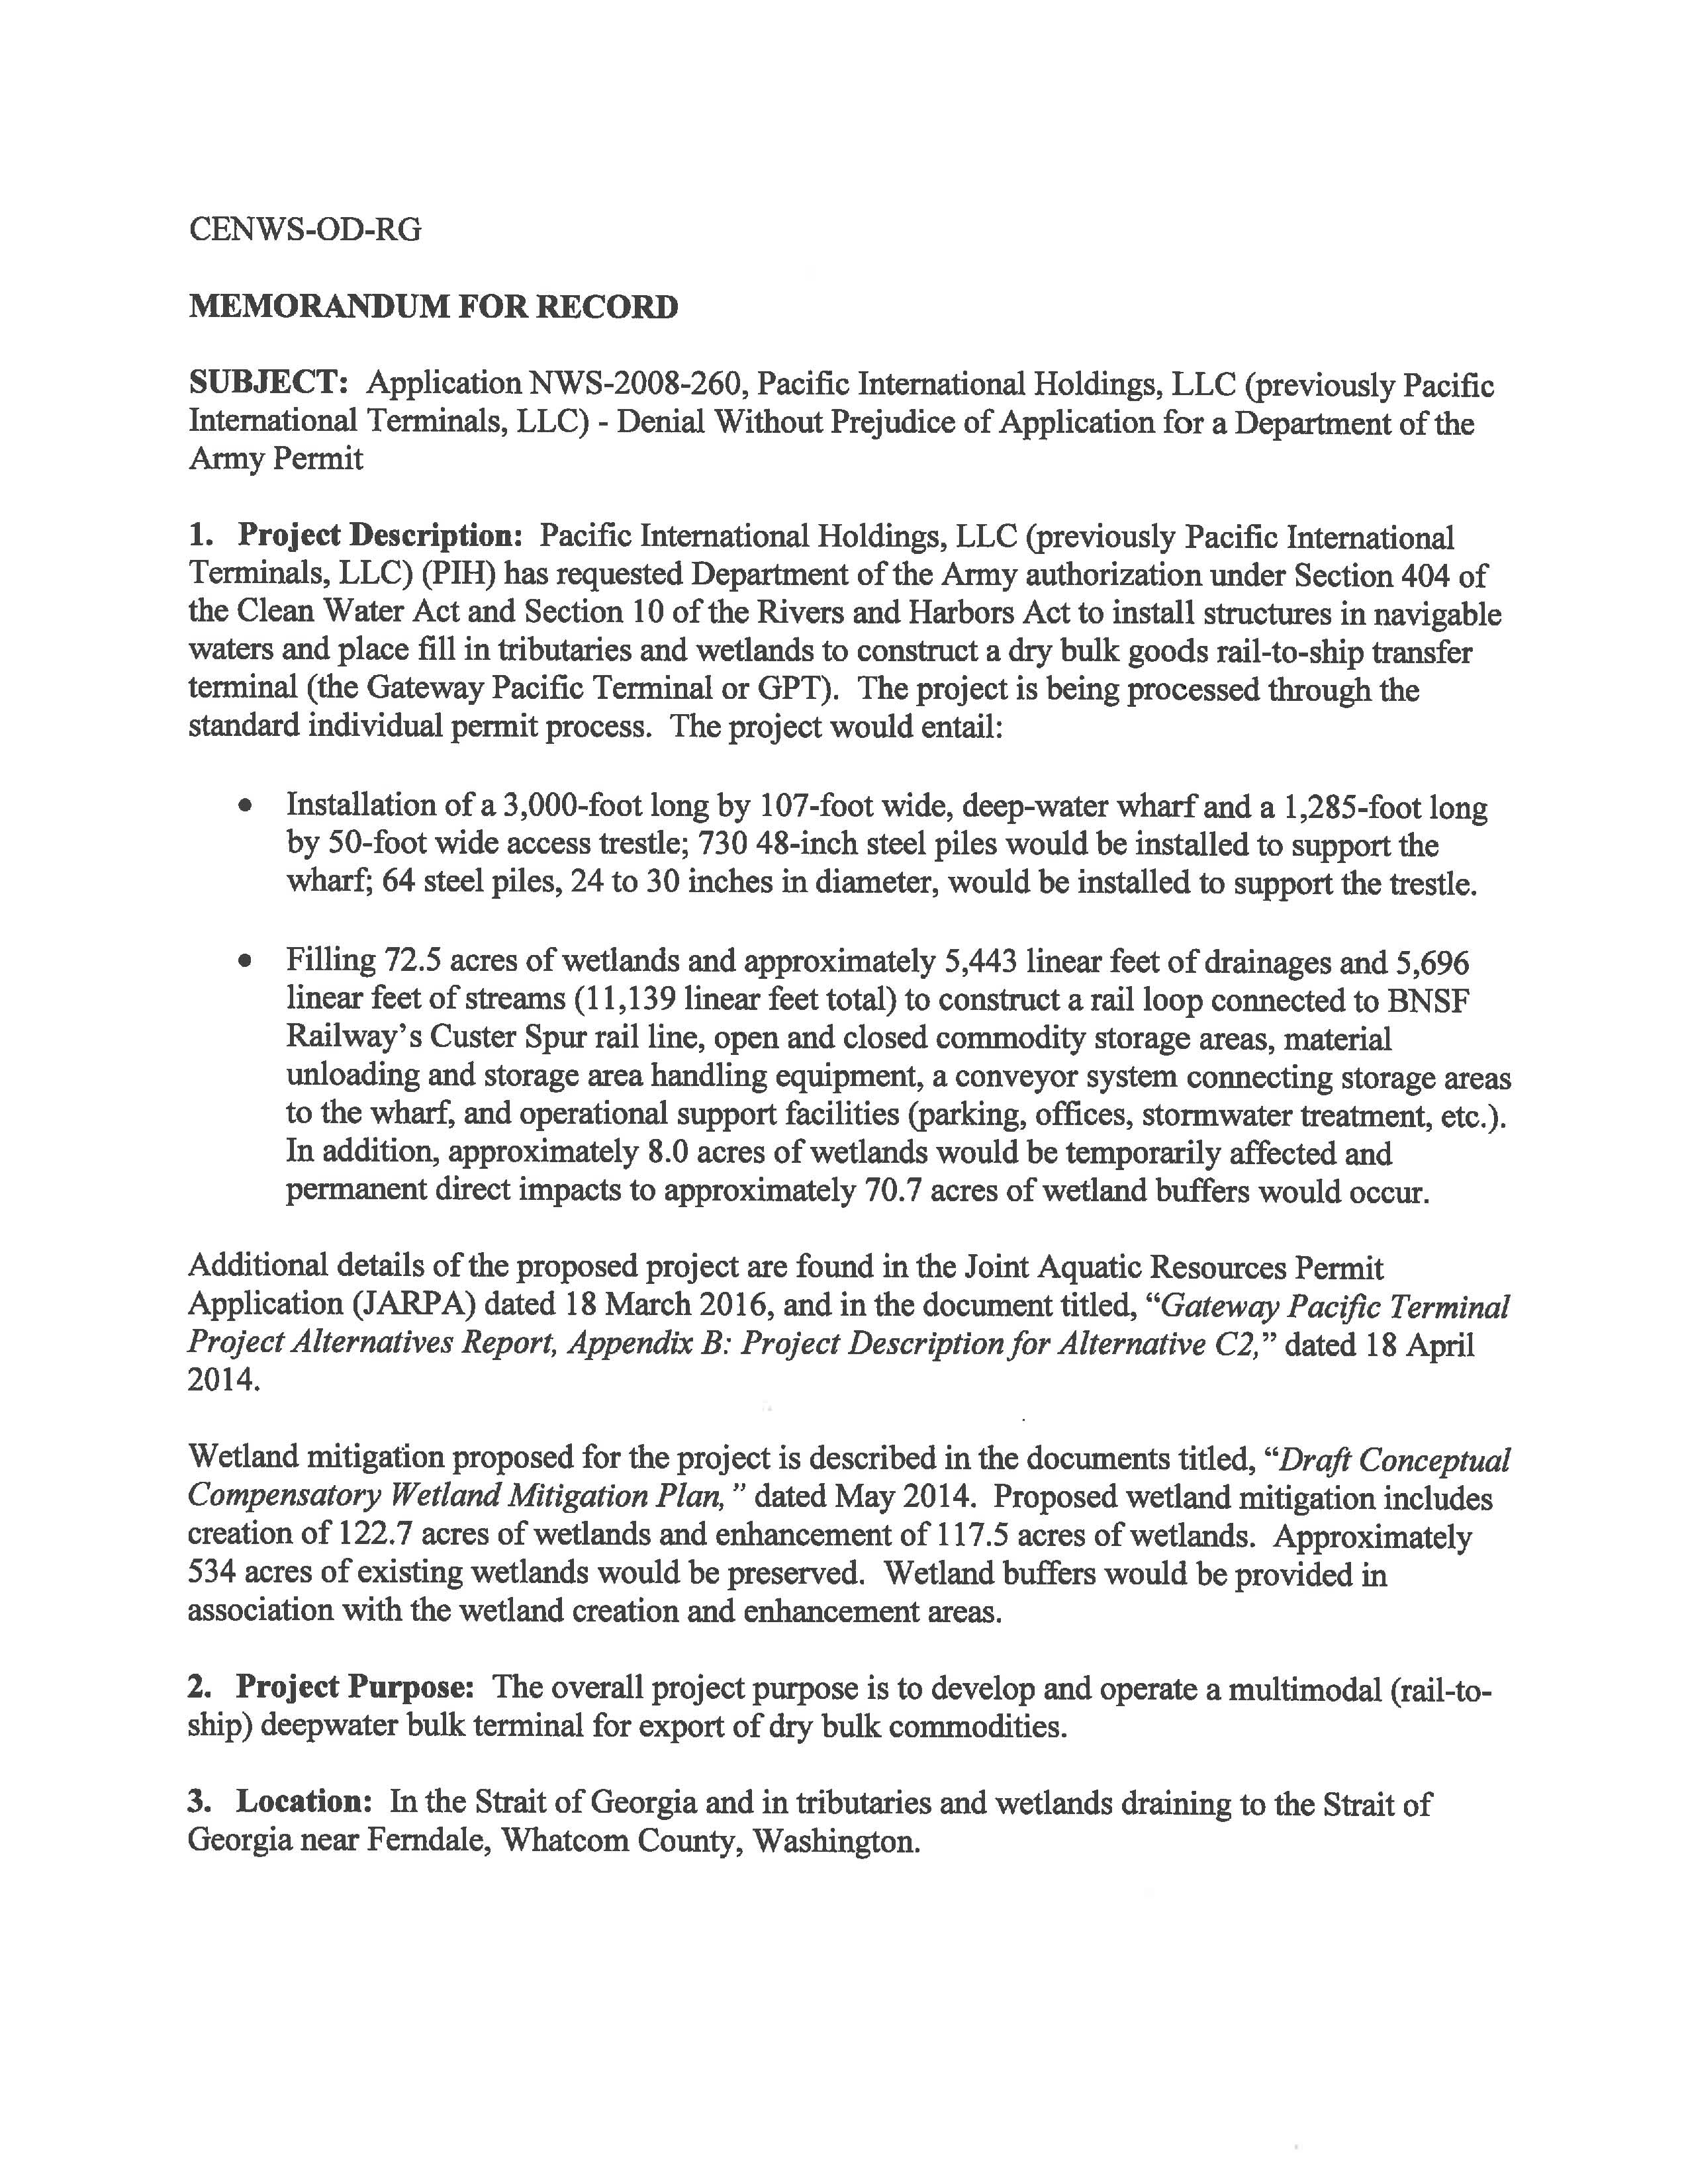 GPT denial letter - 9 May 2016_Page_2